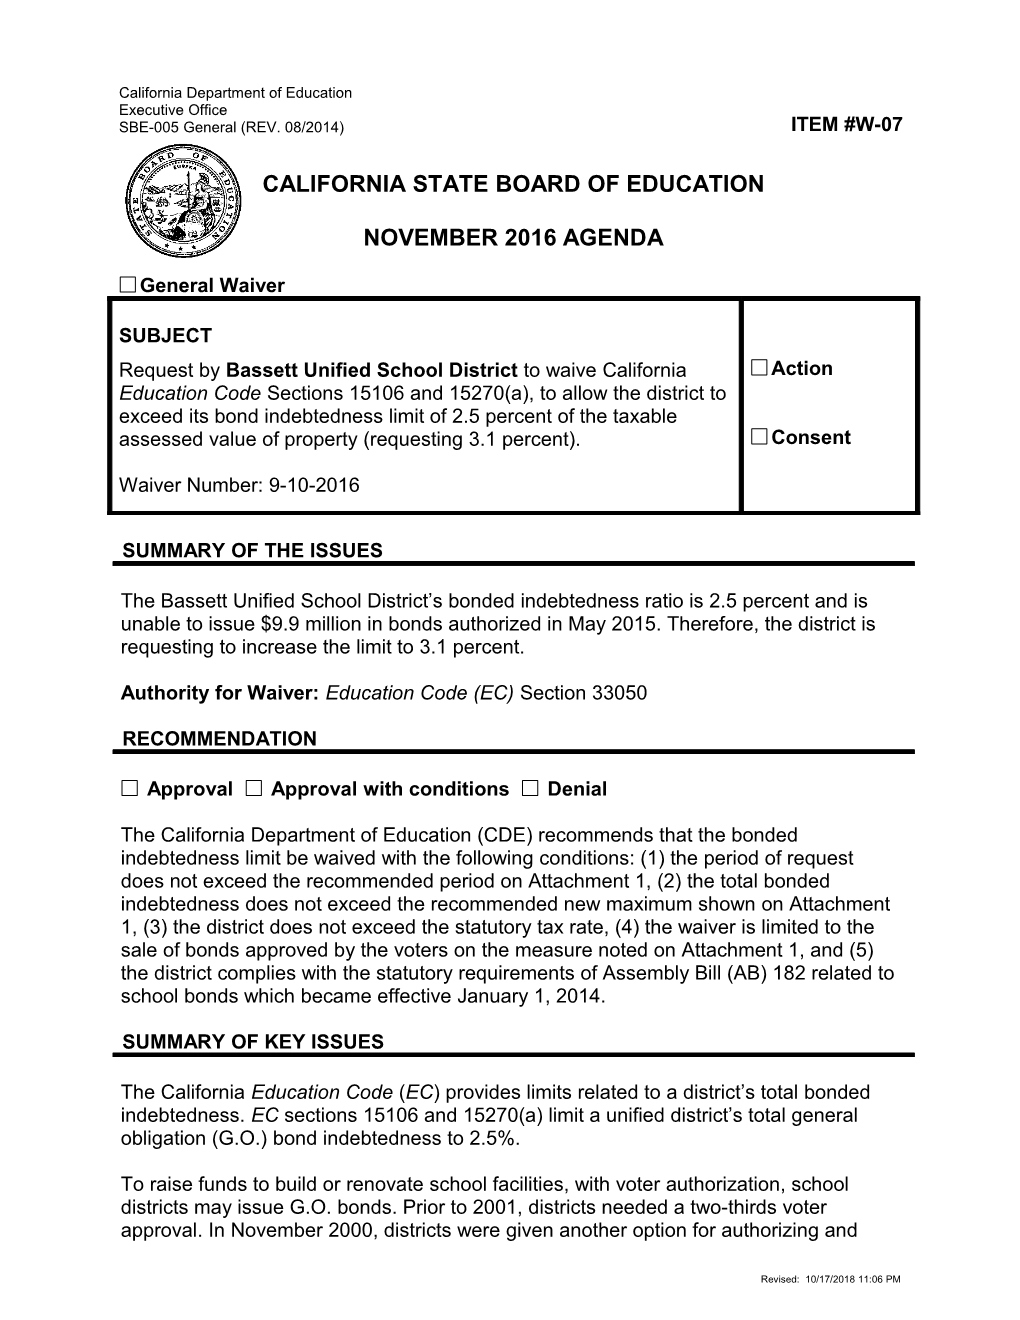 January 2017 Waiver Item W-07 - Meeting Agendas (CA State Board of Education)